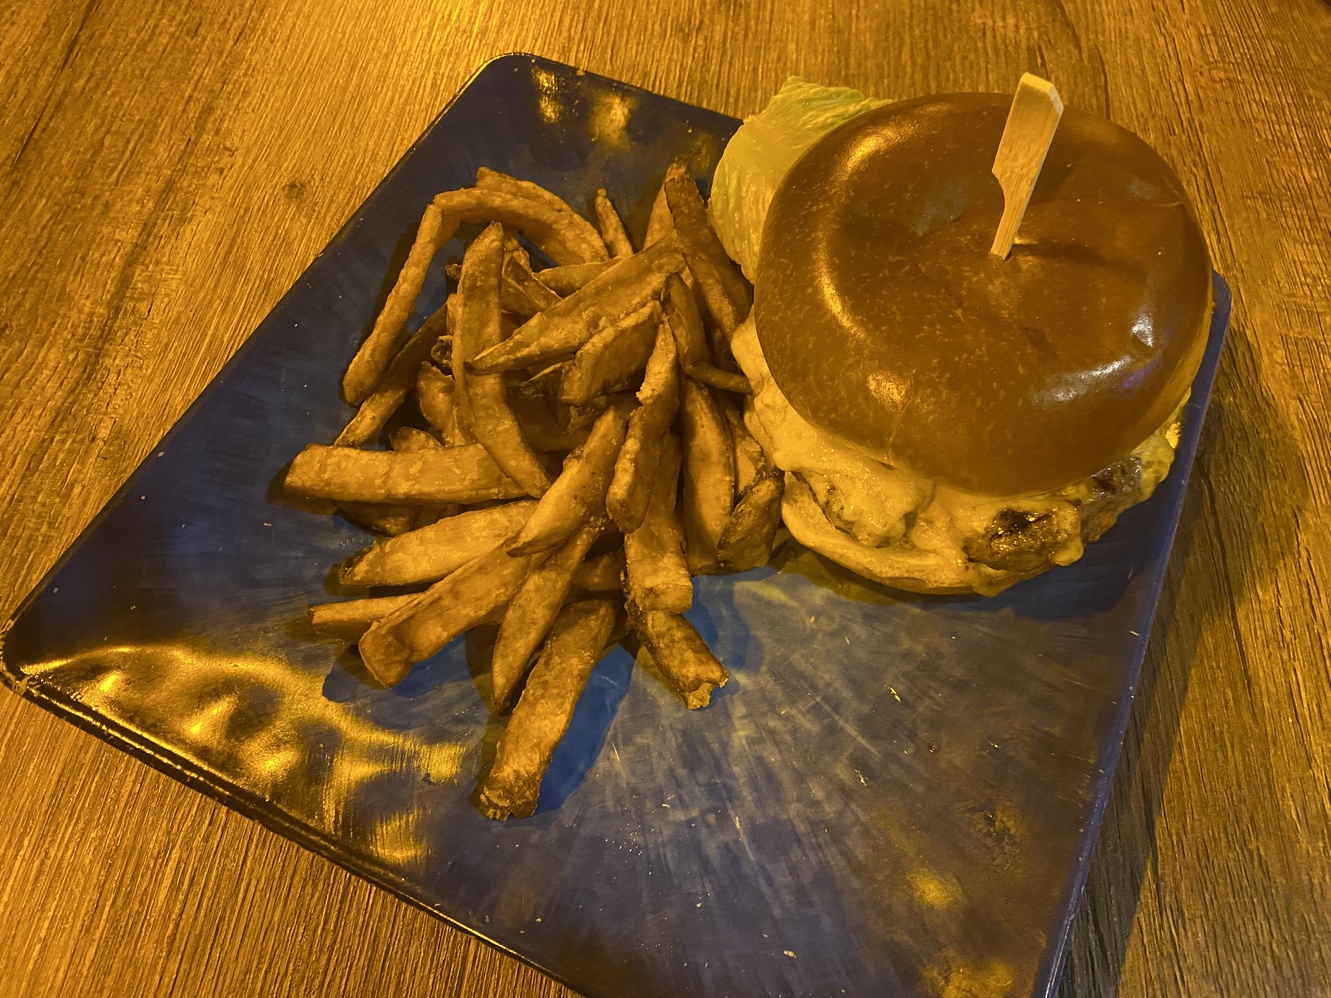 What an awesome cheeseburger and fries platter.